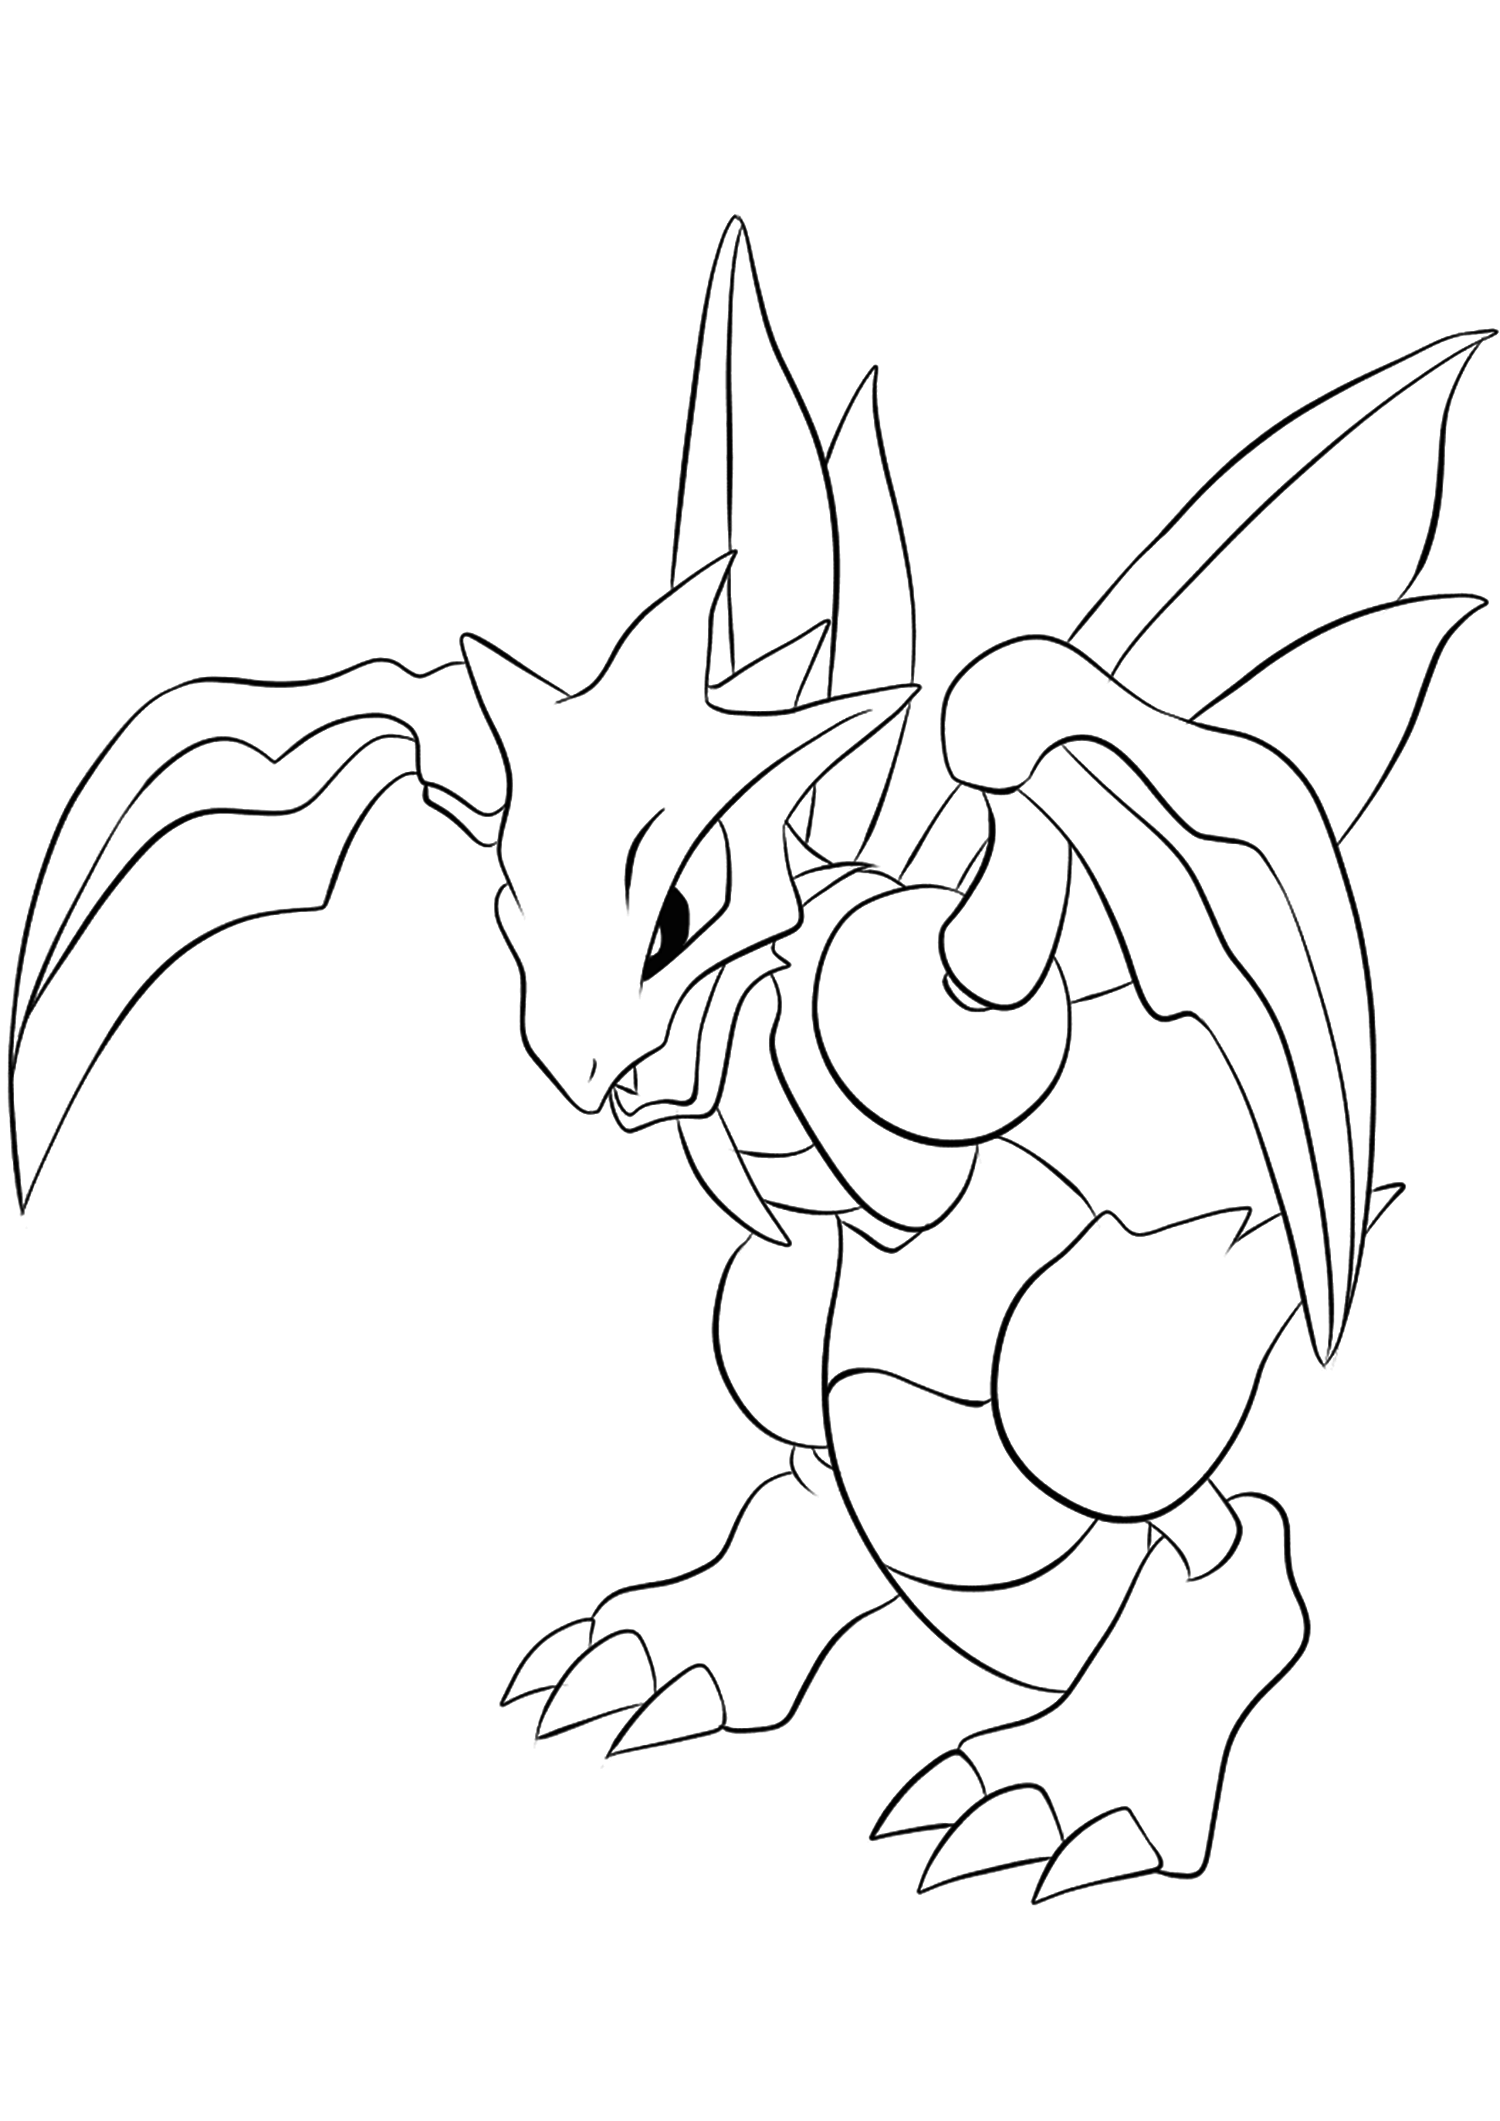 Download Dragon Type Pokemon Coloring Pages - Hd Football